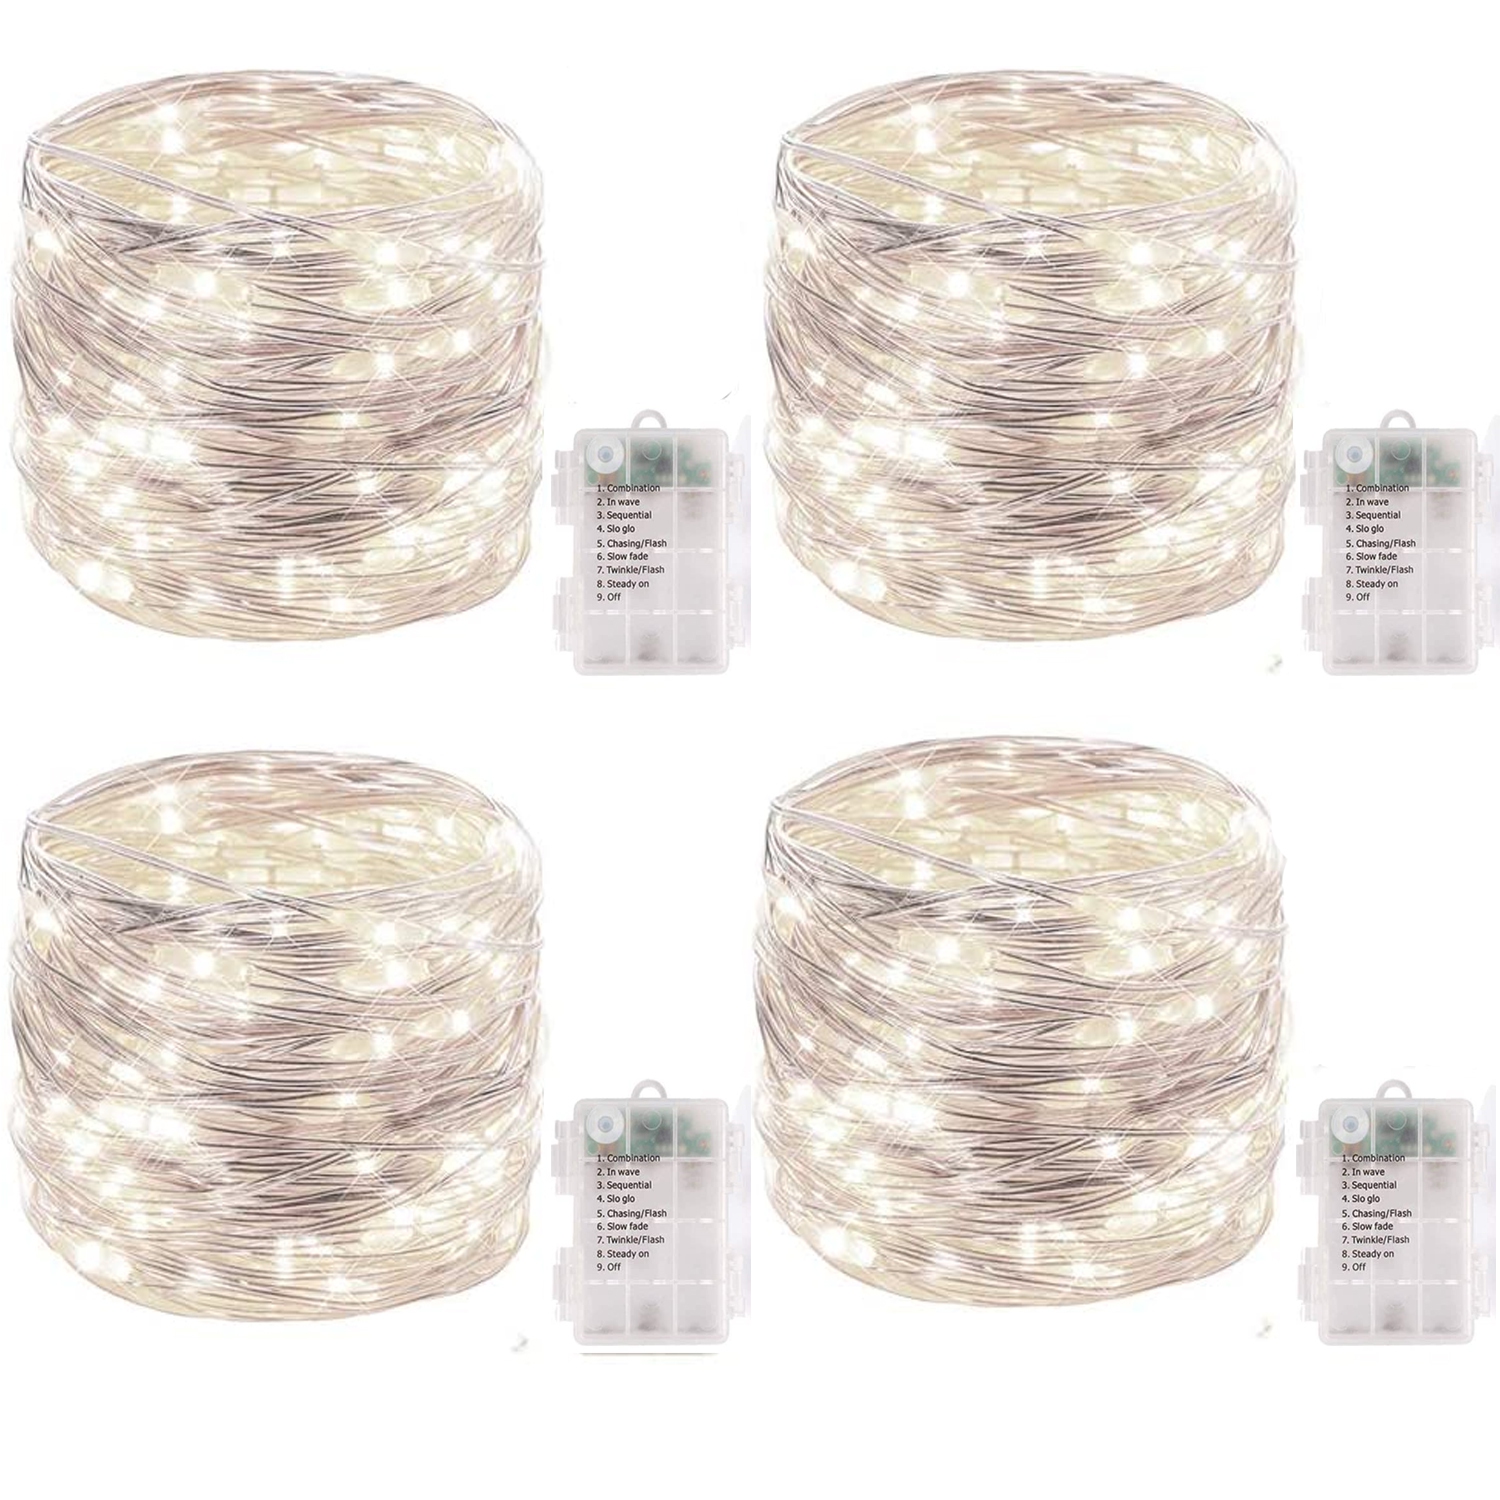 10-30 Led Battery Power Operated Copper Wire Fairy Lights String Xmas Dec #M1